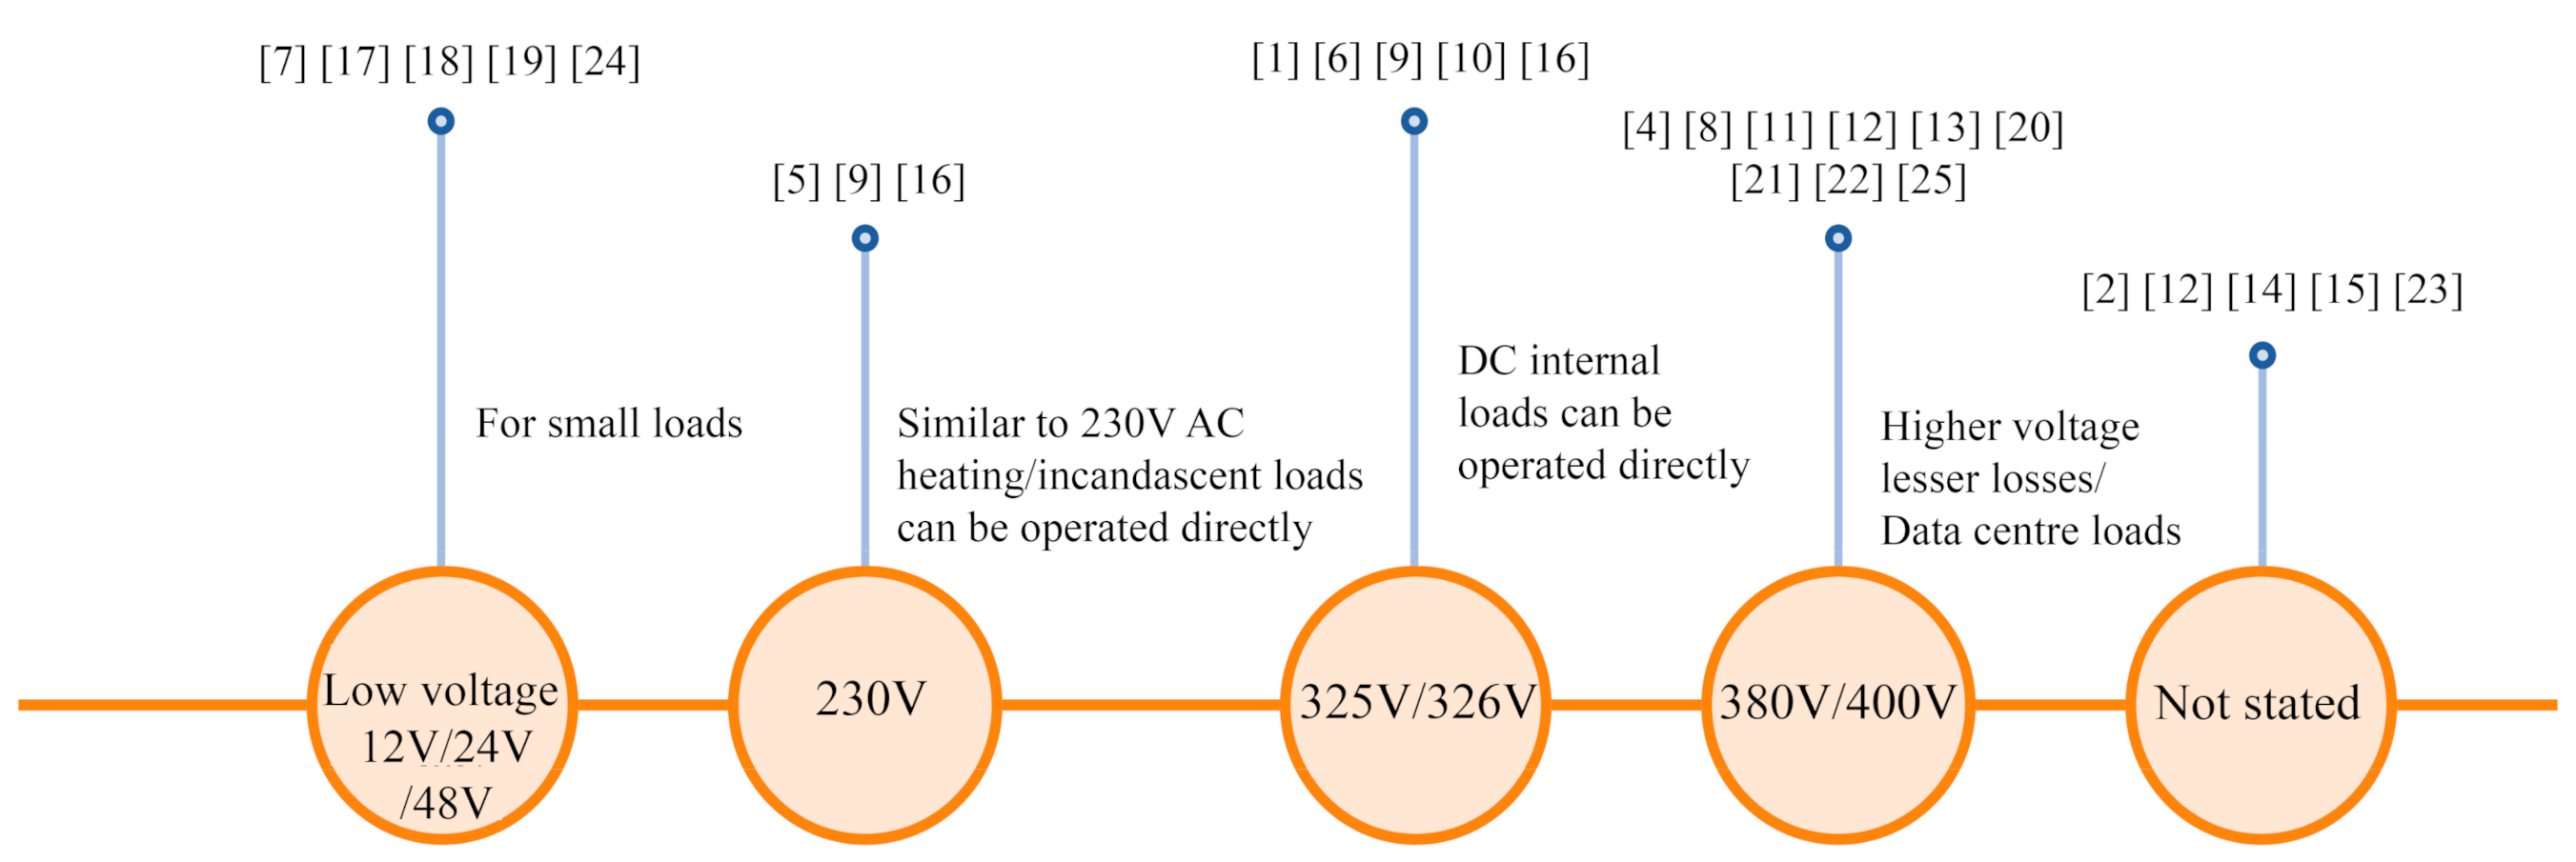 Energies Free Full Text Ac Vs Dc Distribution Efficiency Are We On The Right Path Html